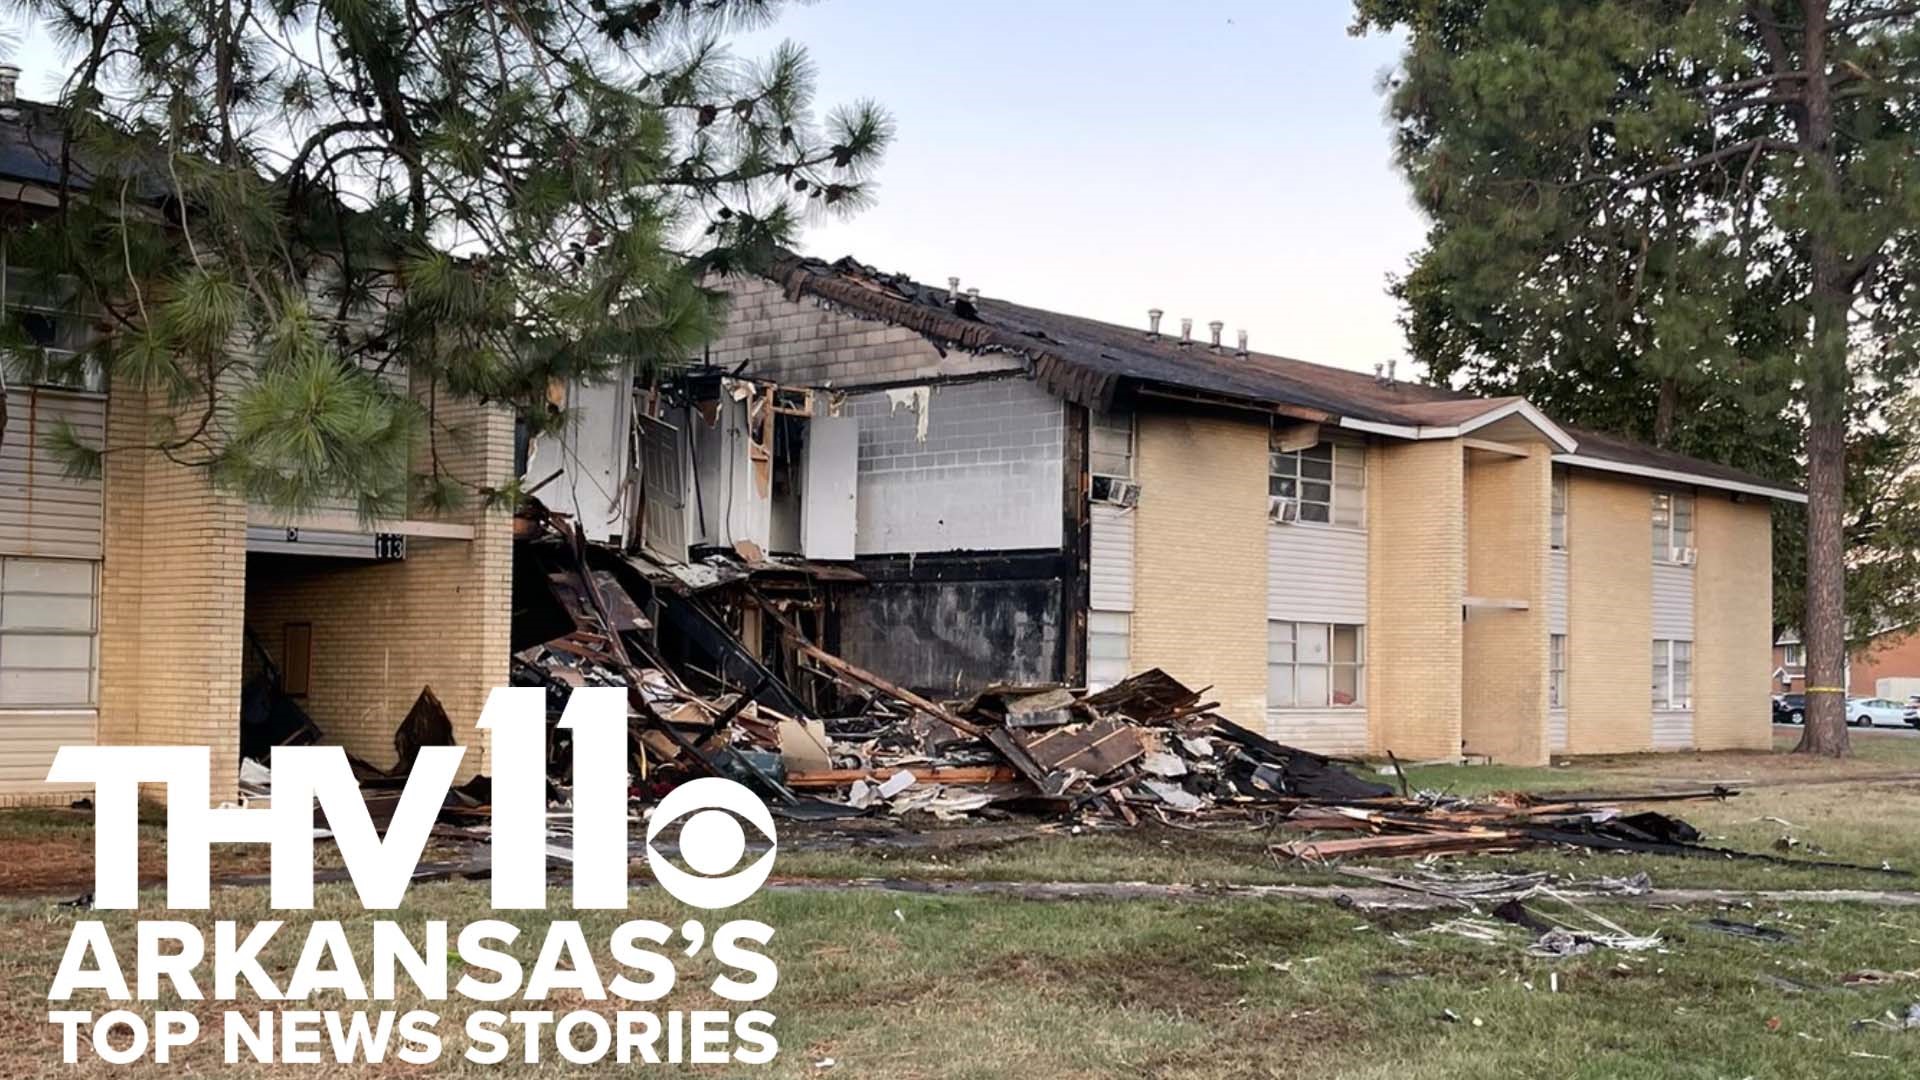 Rolly Hoyt provides the top news stories for October 4, 2022 including a deadly apartment fire in North Little Rock.